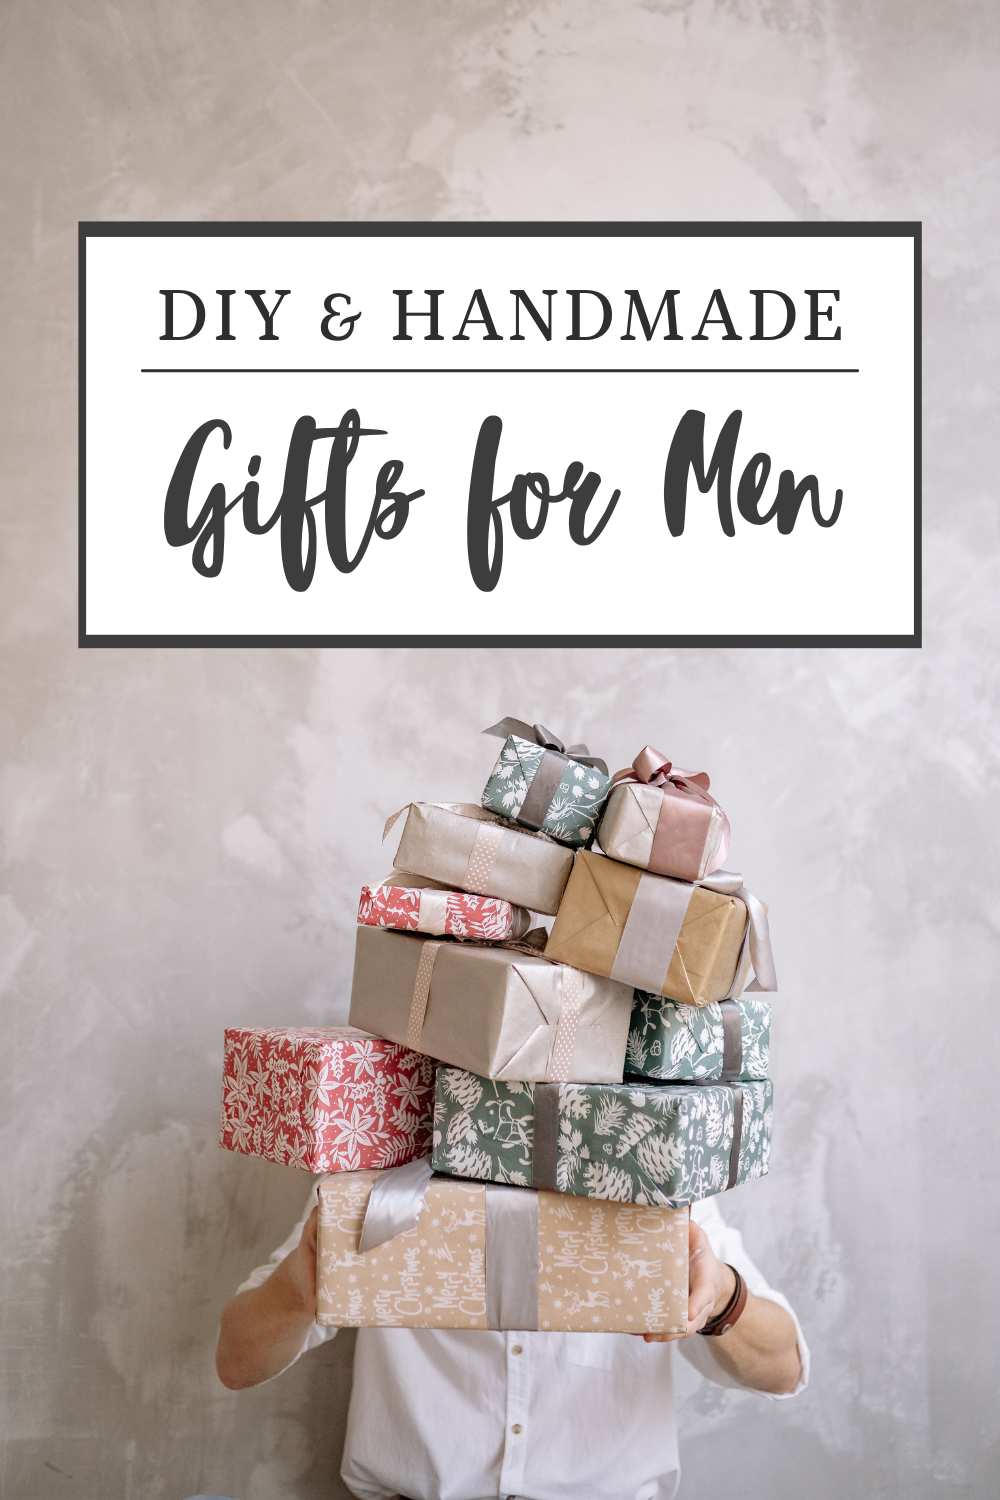 29 DIY Gifts for Men - Busy Being Jennifer